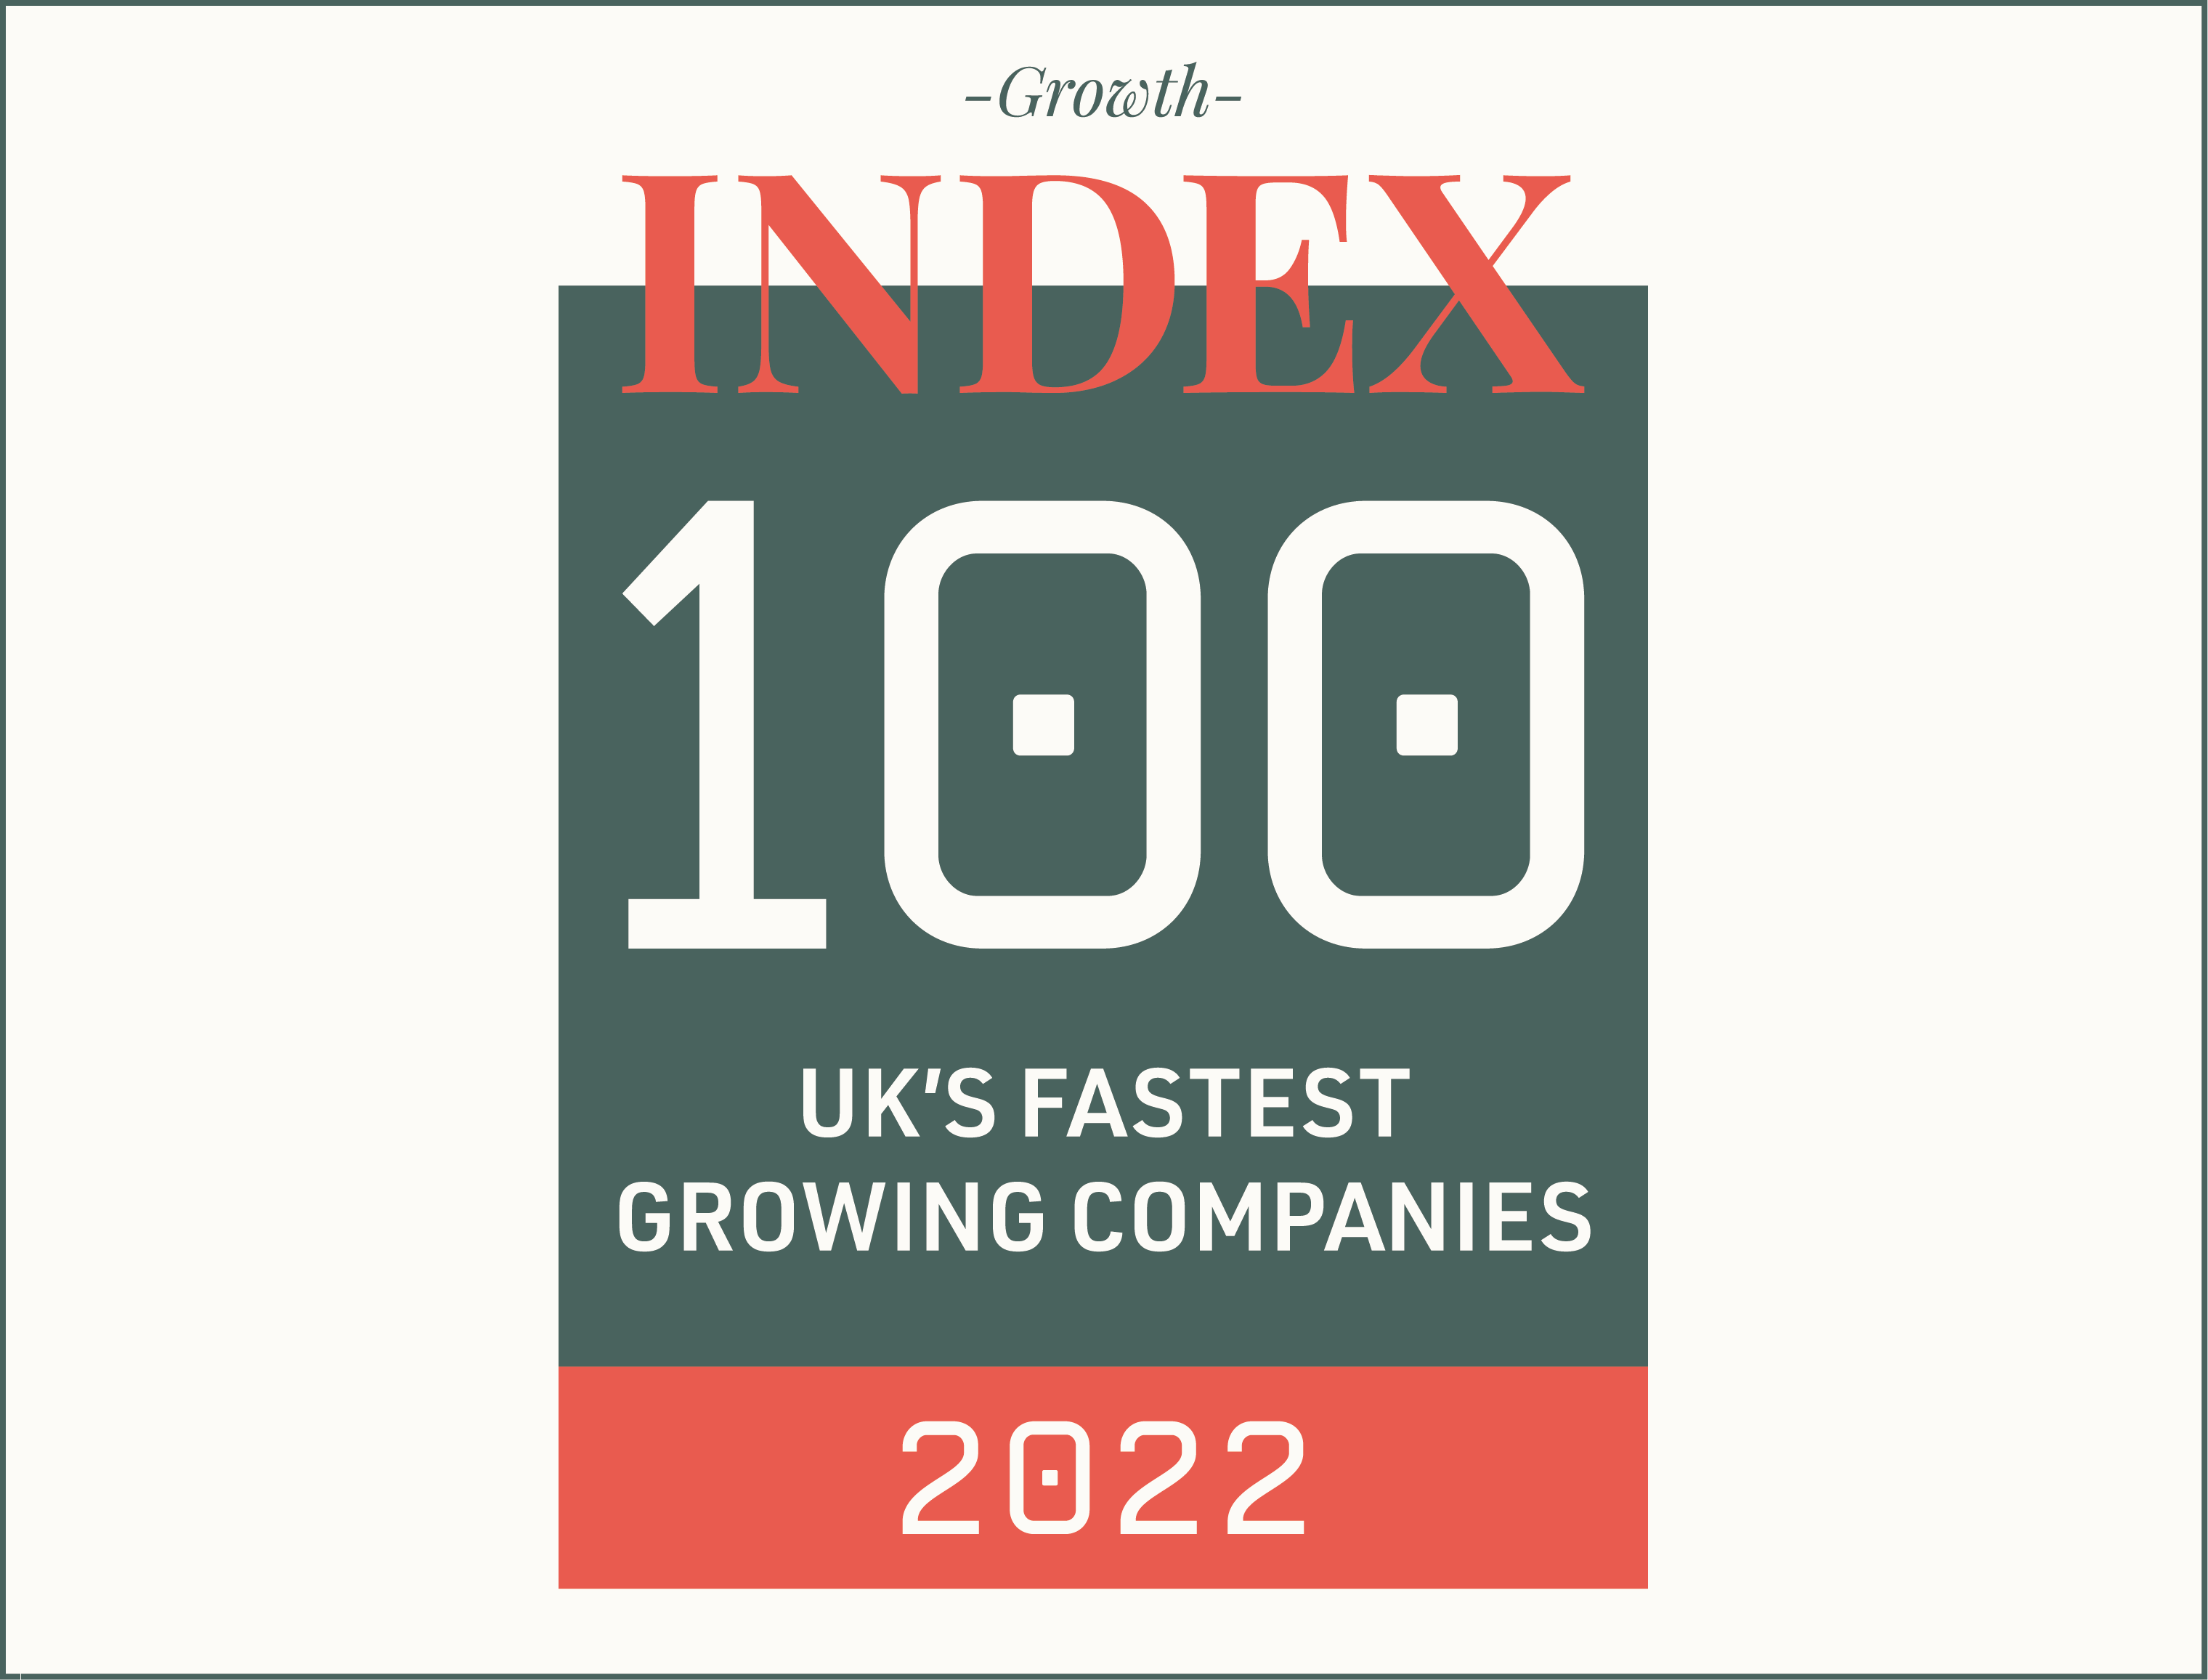 RouteNote are #33 on the Growth Index Top 100 2022